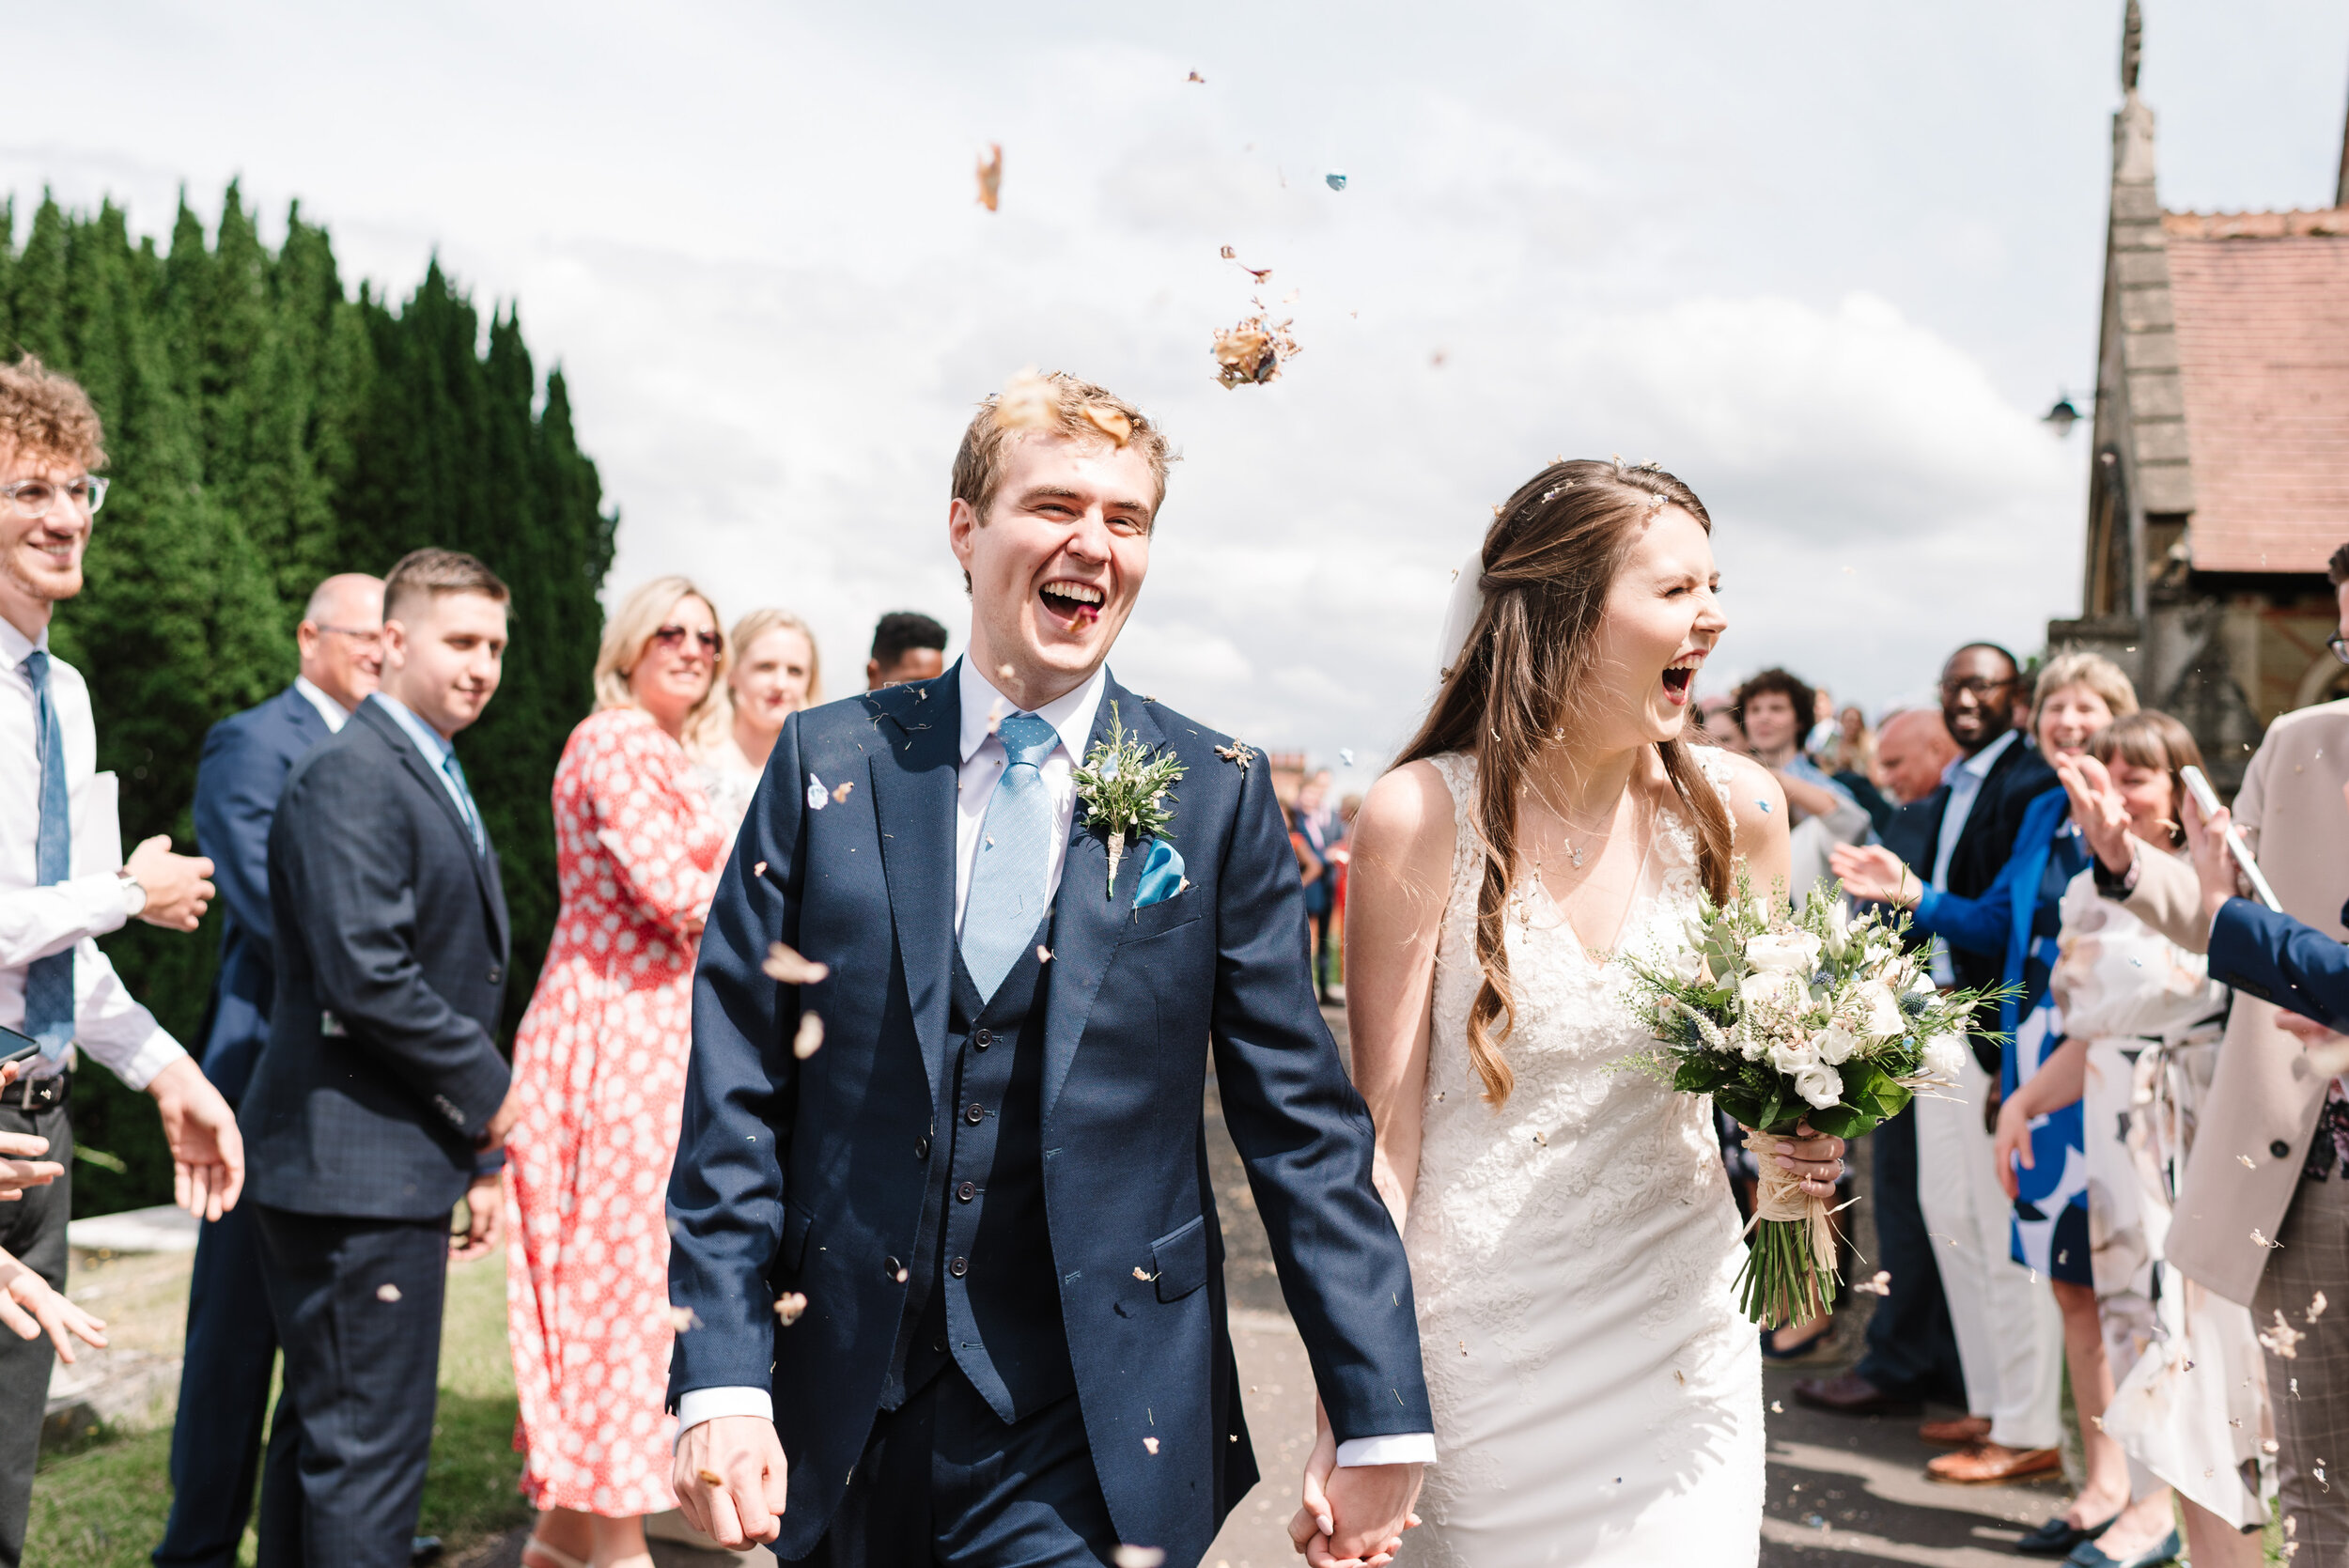 Guests throwing confetti at bride and groom